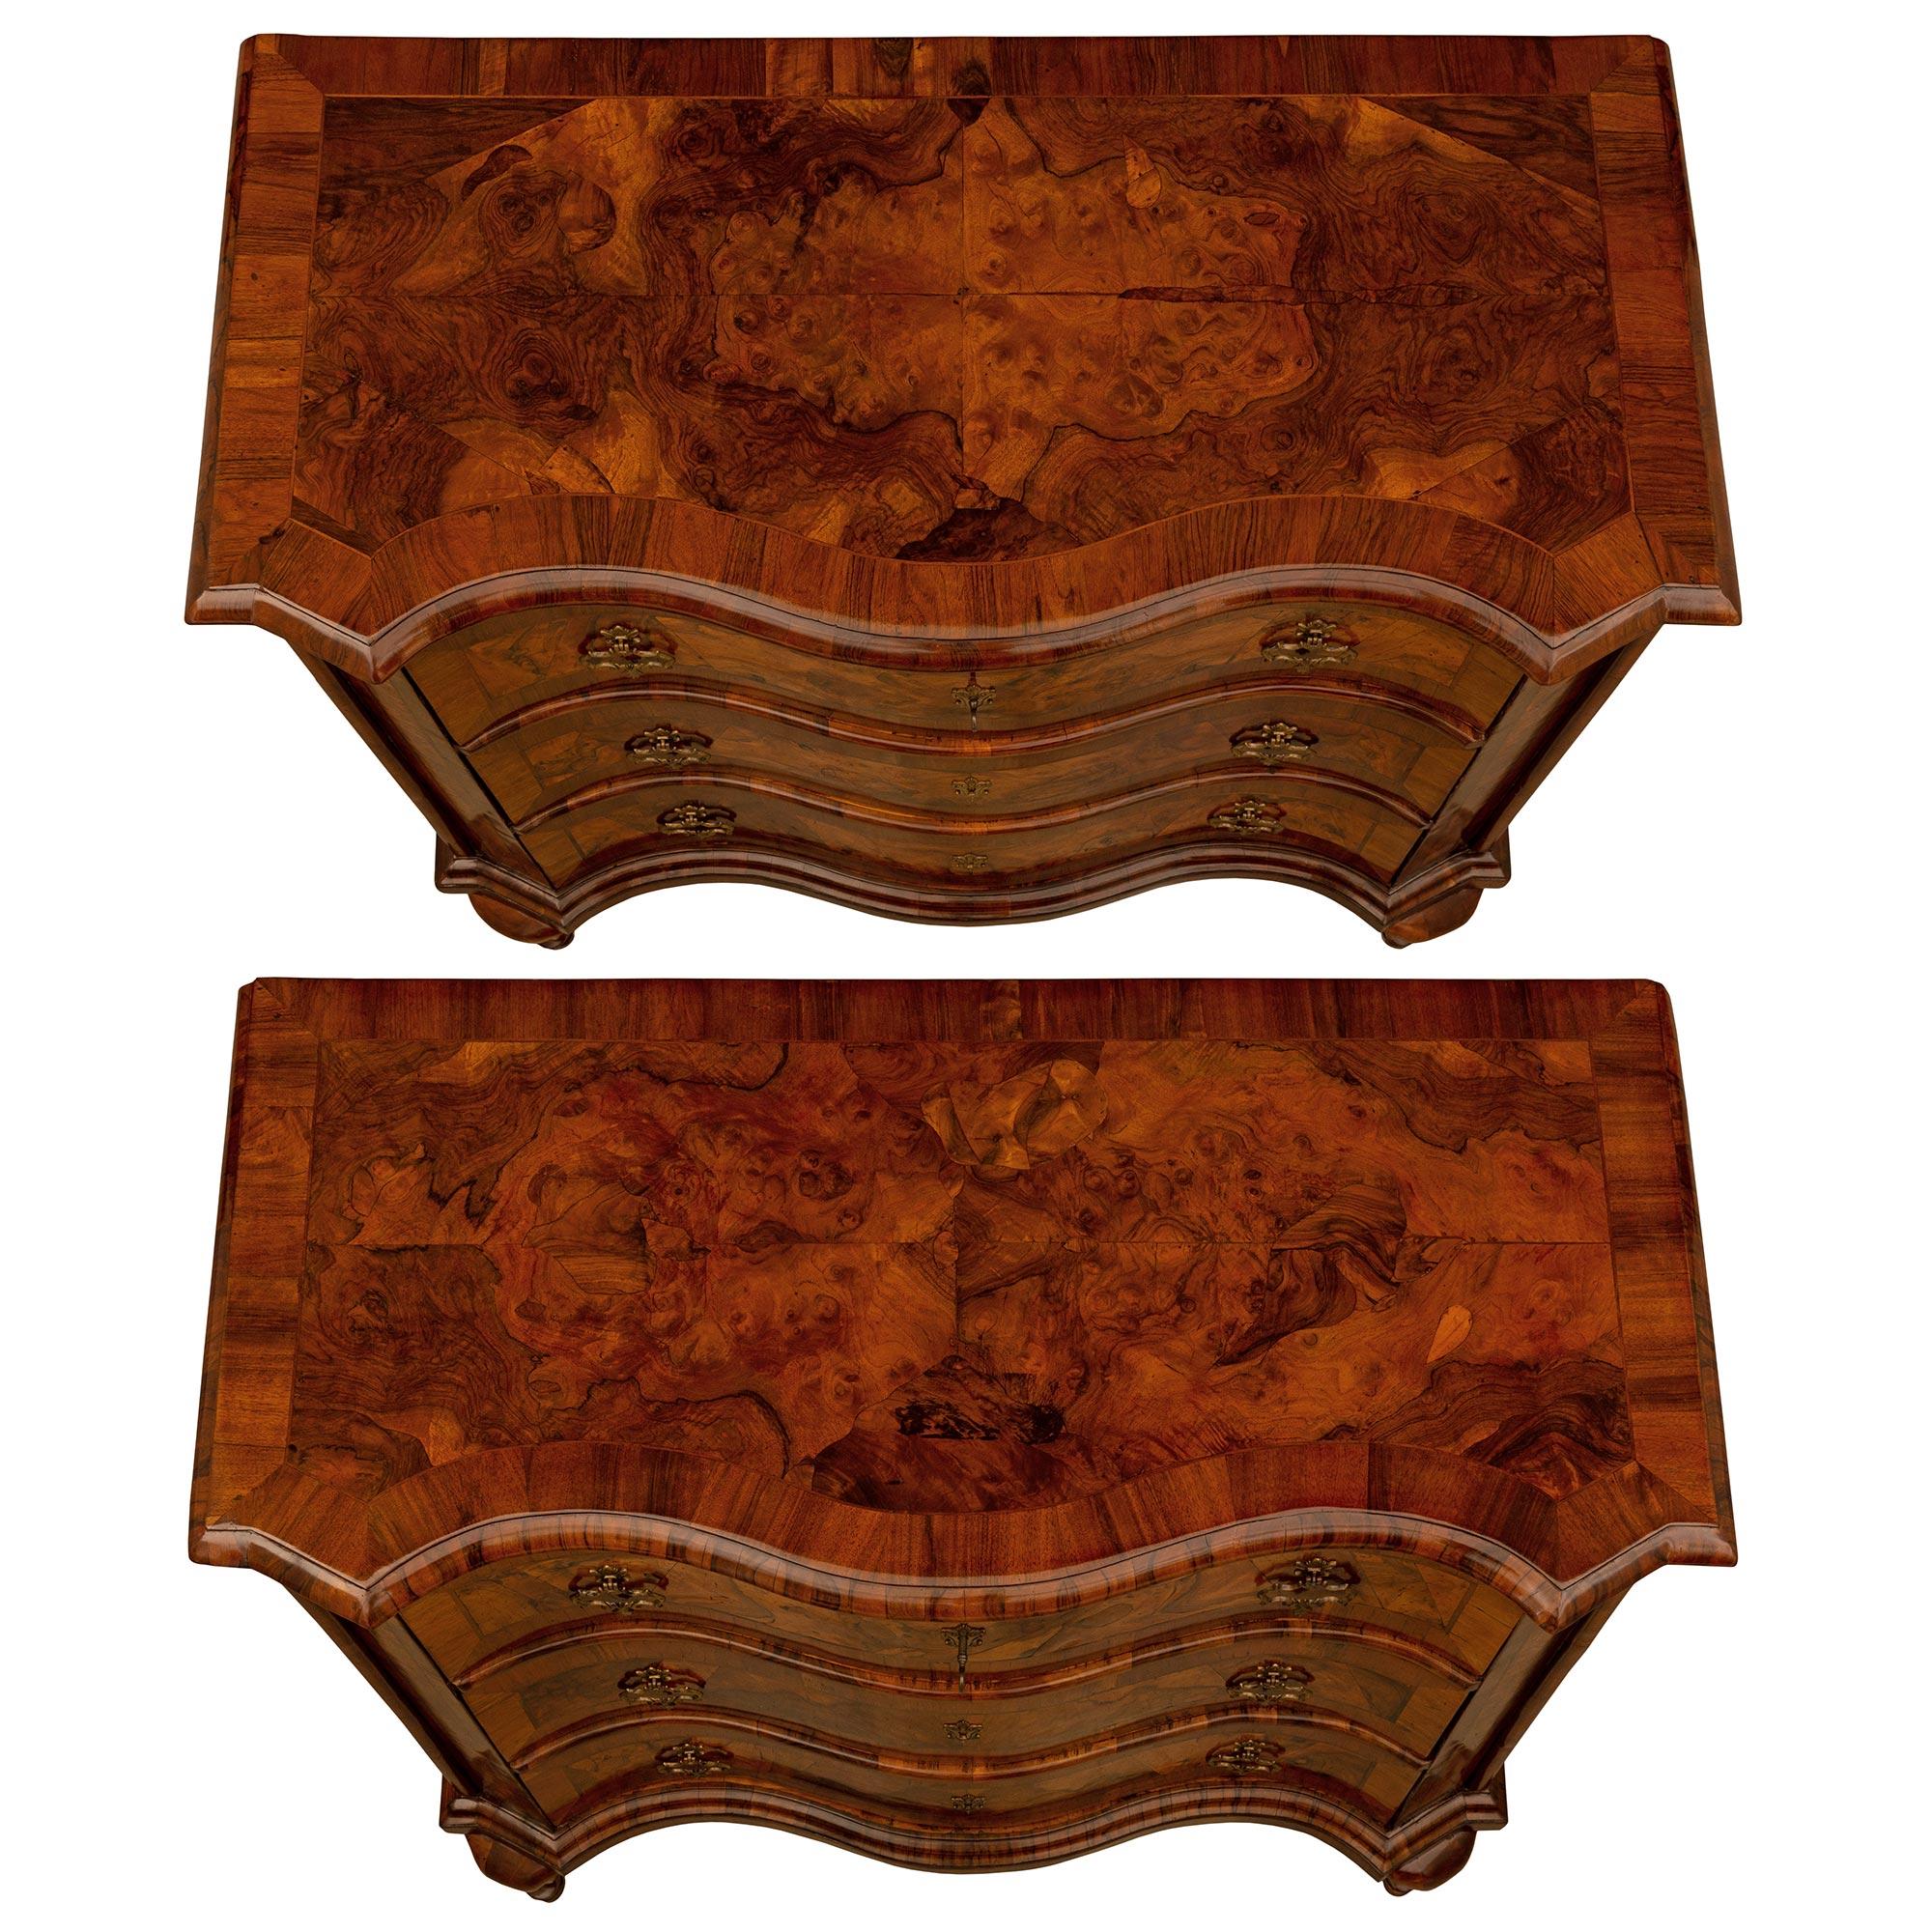 A stunning and extremely decorative pair of Italian 18th century Baroque st. Walnut, burl Walnut, and bronze commodes. Each three drawer chest is raised by unique and most elegant scrolled tapered legs with fine mottled feet. The bombee serpentine